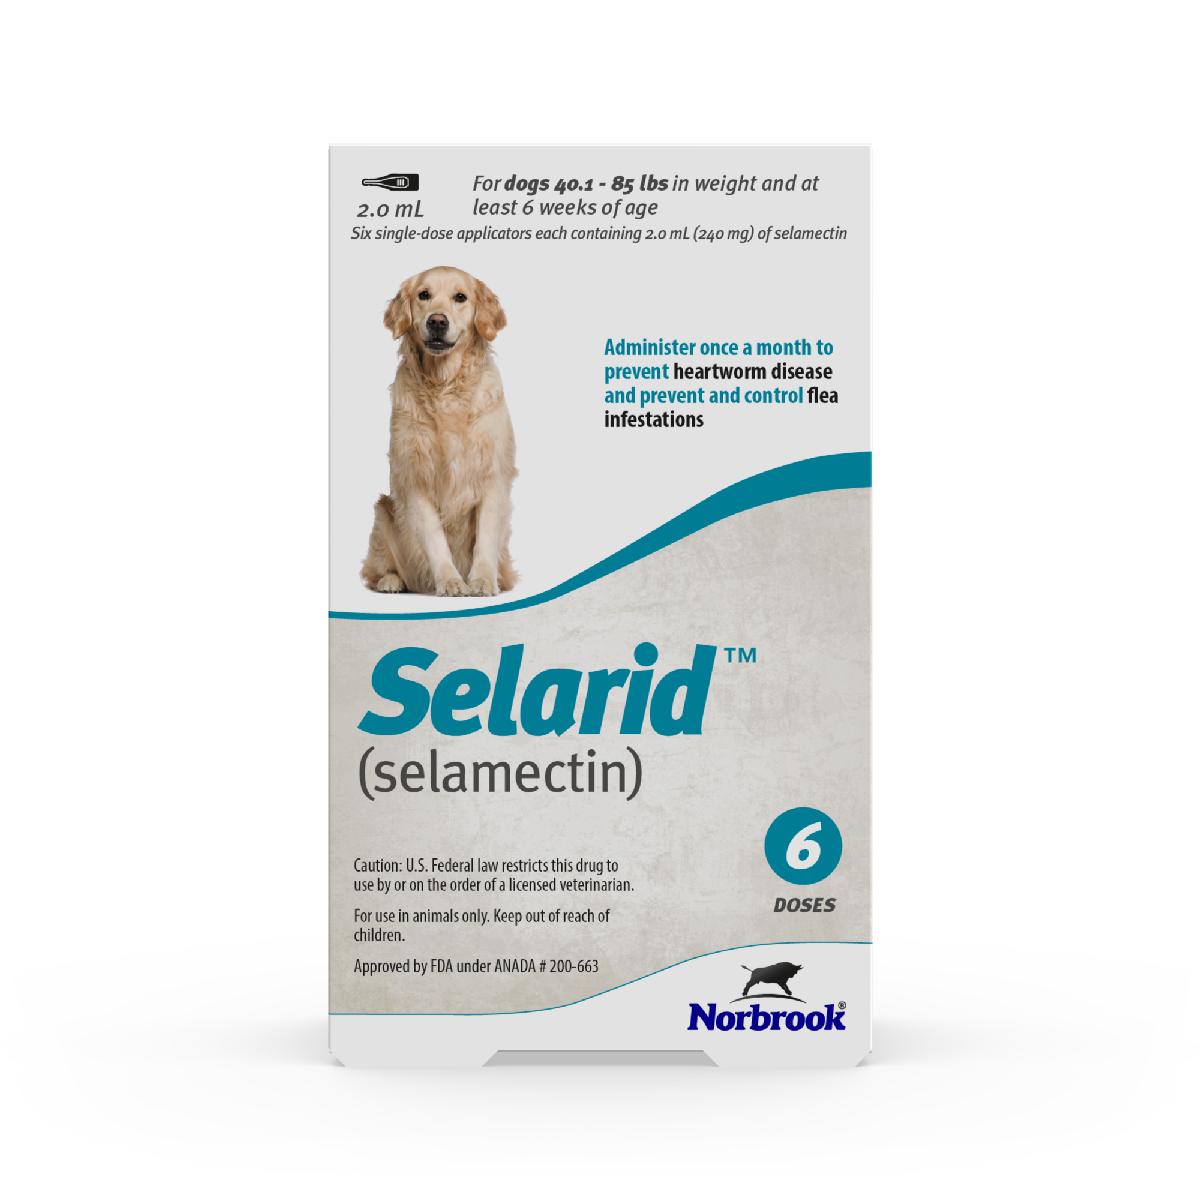 Selarid (selamectin) Topical Parasiticide for Dogs 40.185 lbs, 6 count